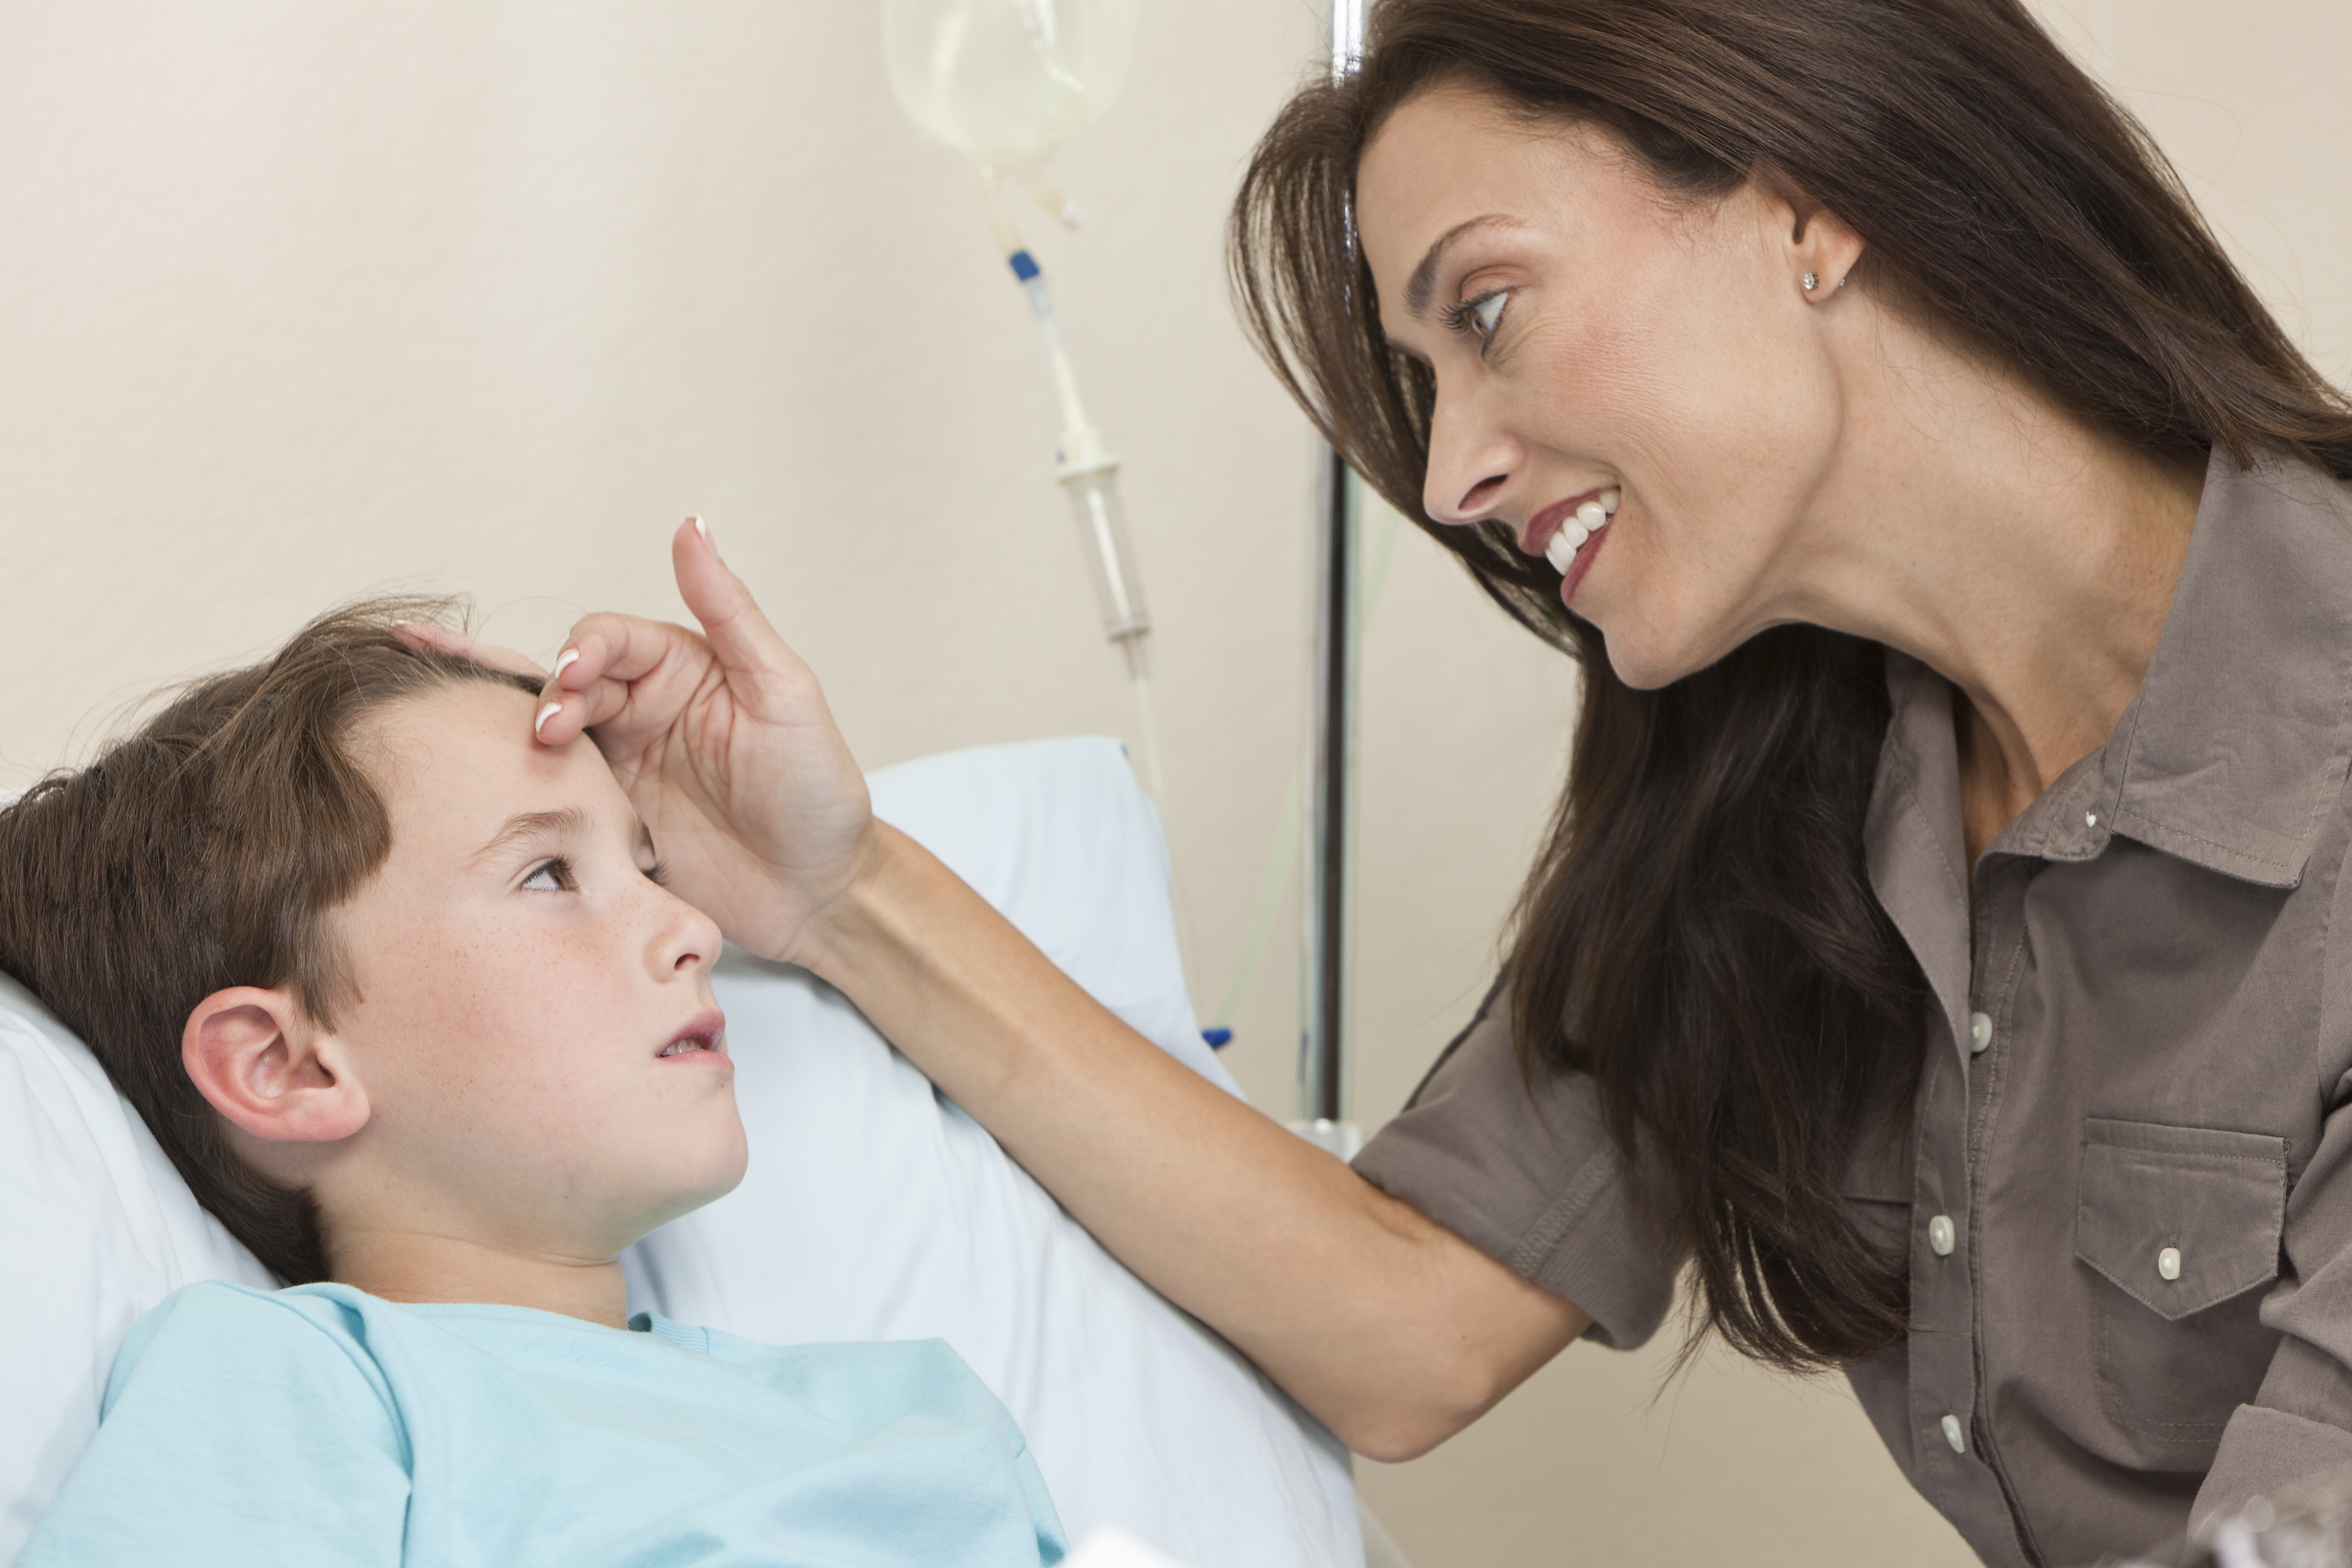 Mother visiting teen son in hospital ward | Source: Shutterstock.com